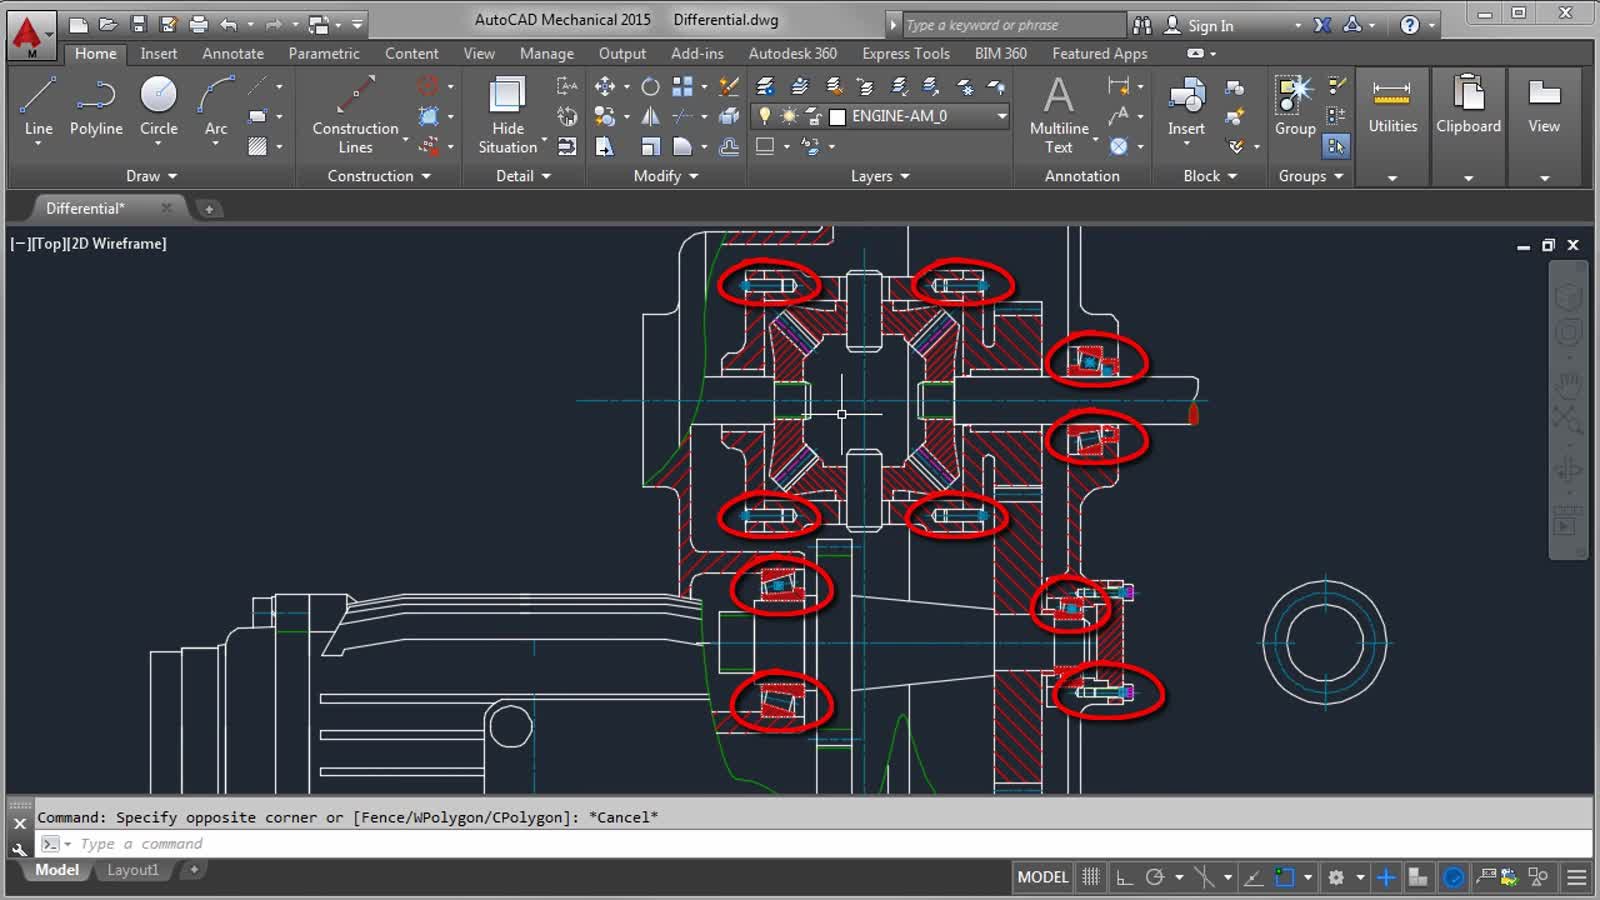 About Using Content Libraries (video) | AutoCAD Mechanical 2019 | Autodesk Knowledge Network